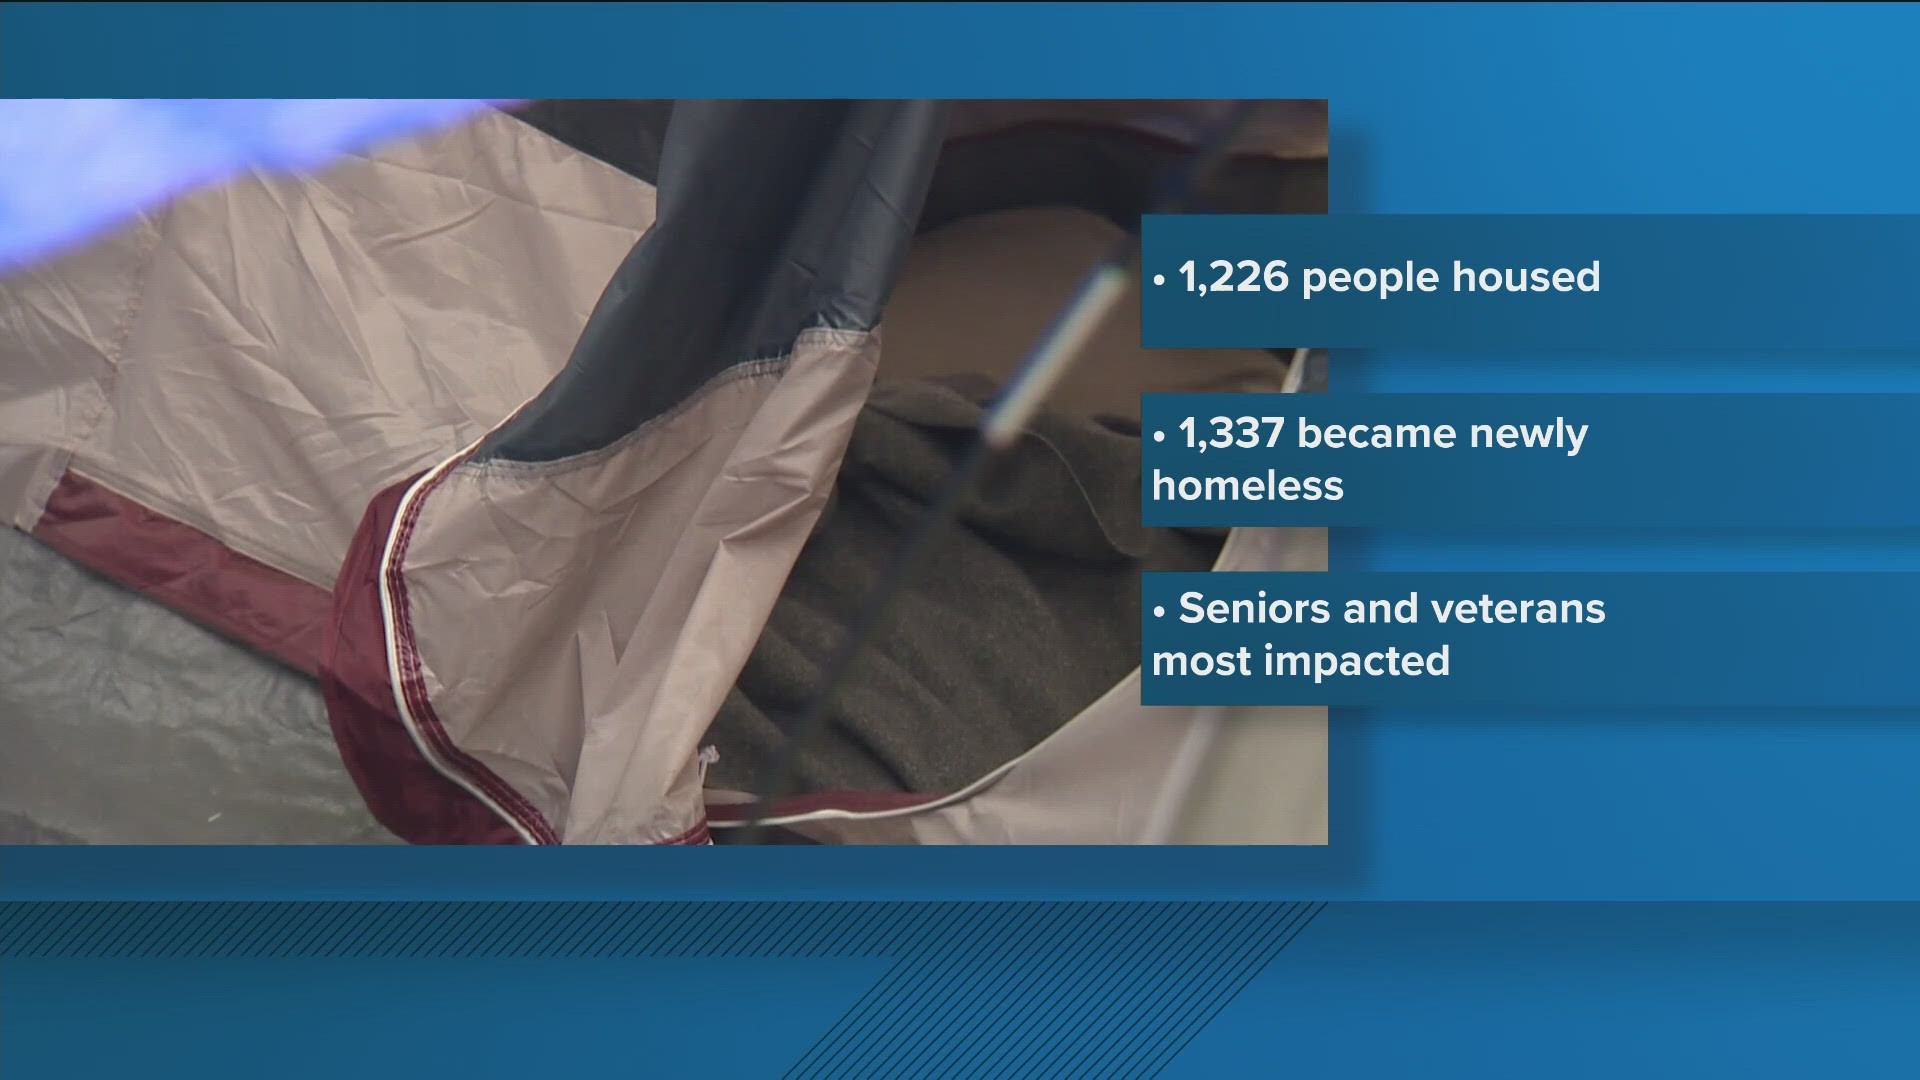 The proposed reductions to the new fiscal budget come as a new report shows 24 straight months where more people became homeless than exited homelessness.